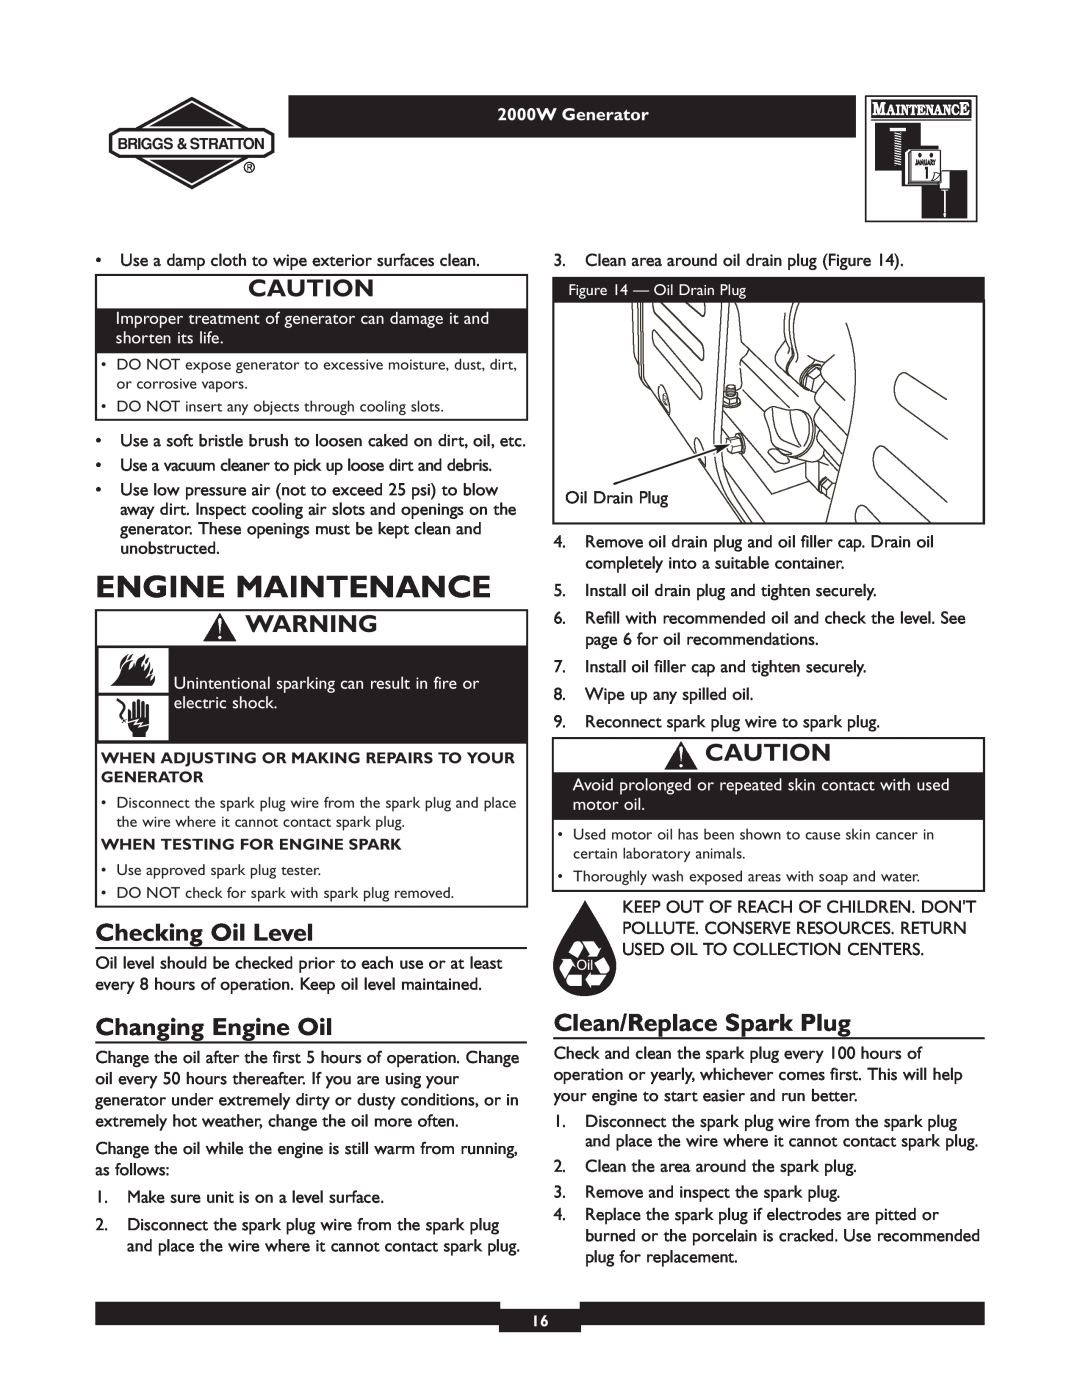 Briggs & Stratton 30239 owner manual Engine Maintenance, Checking Oil Level, Changing Engine Oil, Clean/Replace Spark Plug 